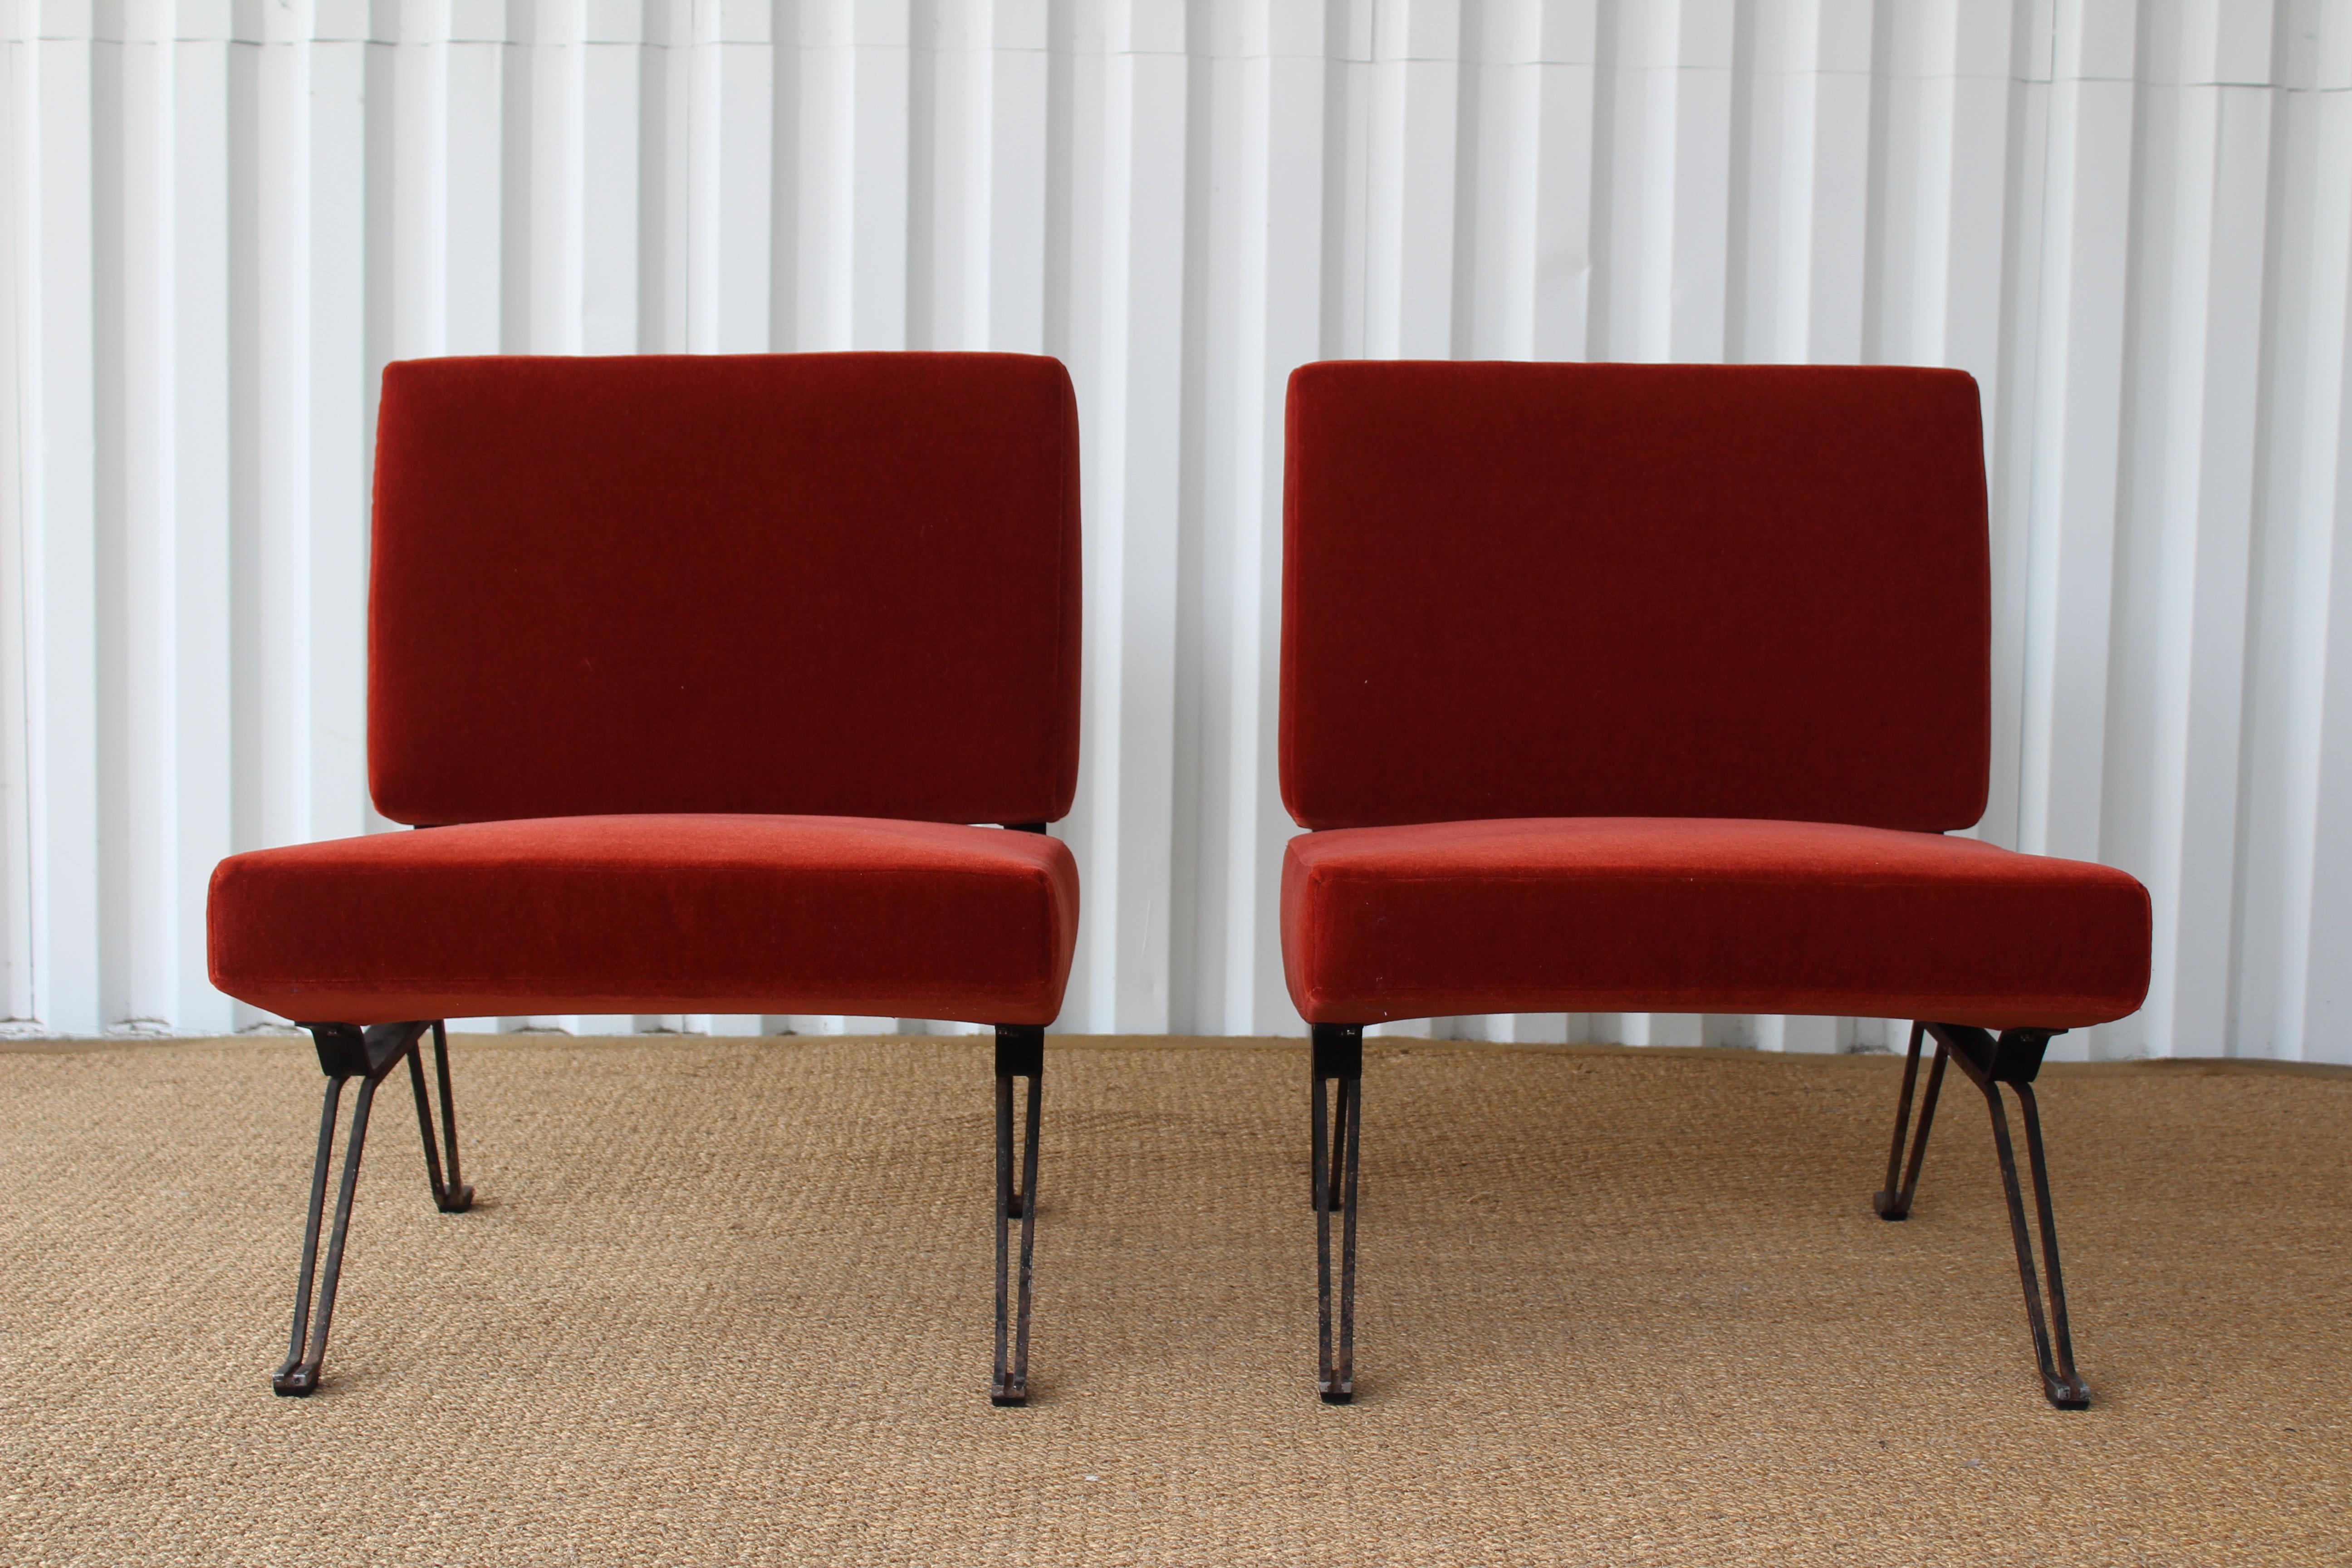 Pair of 1950s Mid-Century Modern chairs from Italy. The pair has been reupholstered in burnt orange mohair. The iron bases have been left with original patina which show signs of wear. Sold only as a pair.